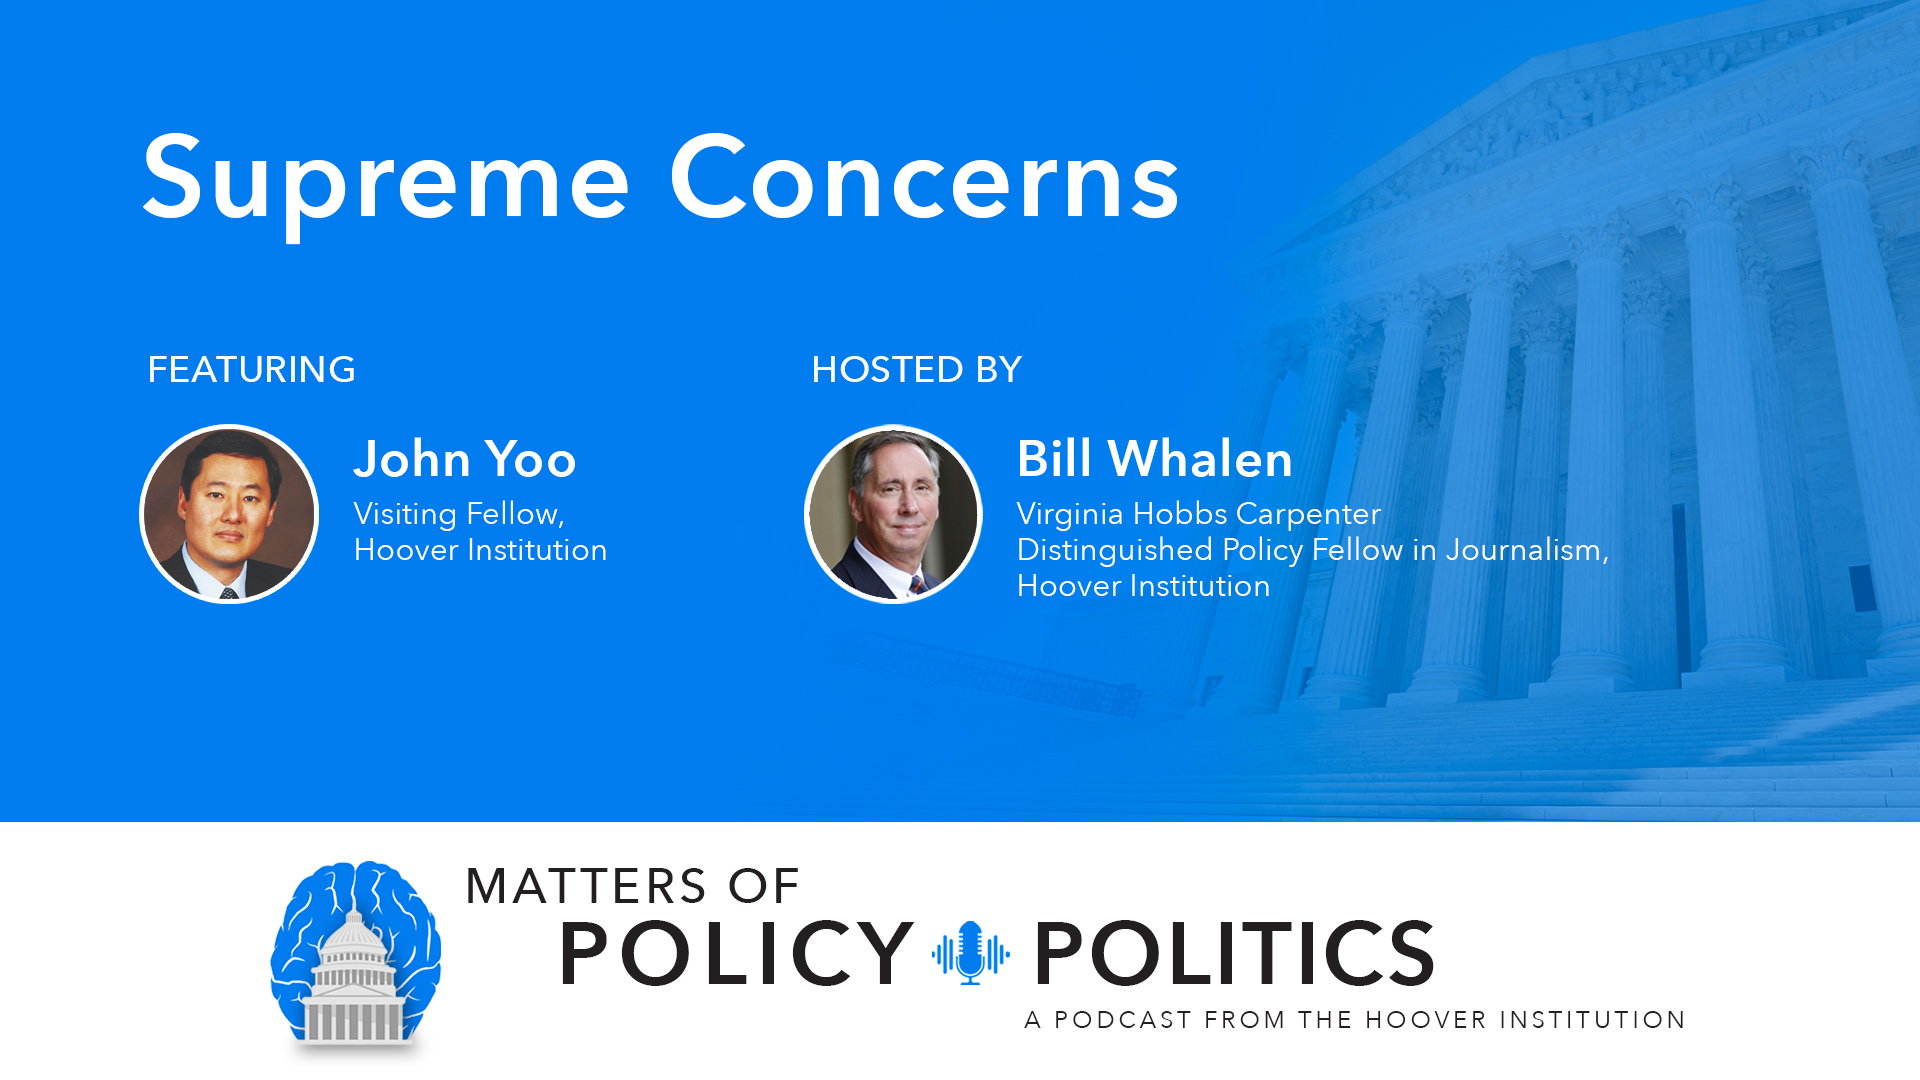 Matters Of Policy & Politics: Supreme Concerns